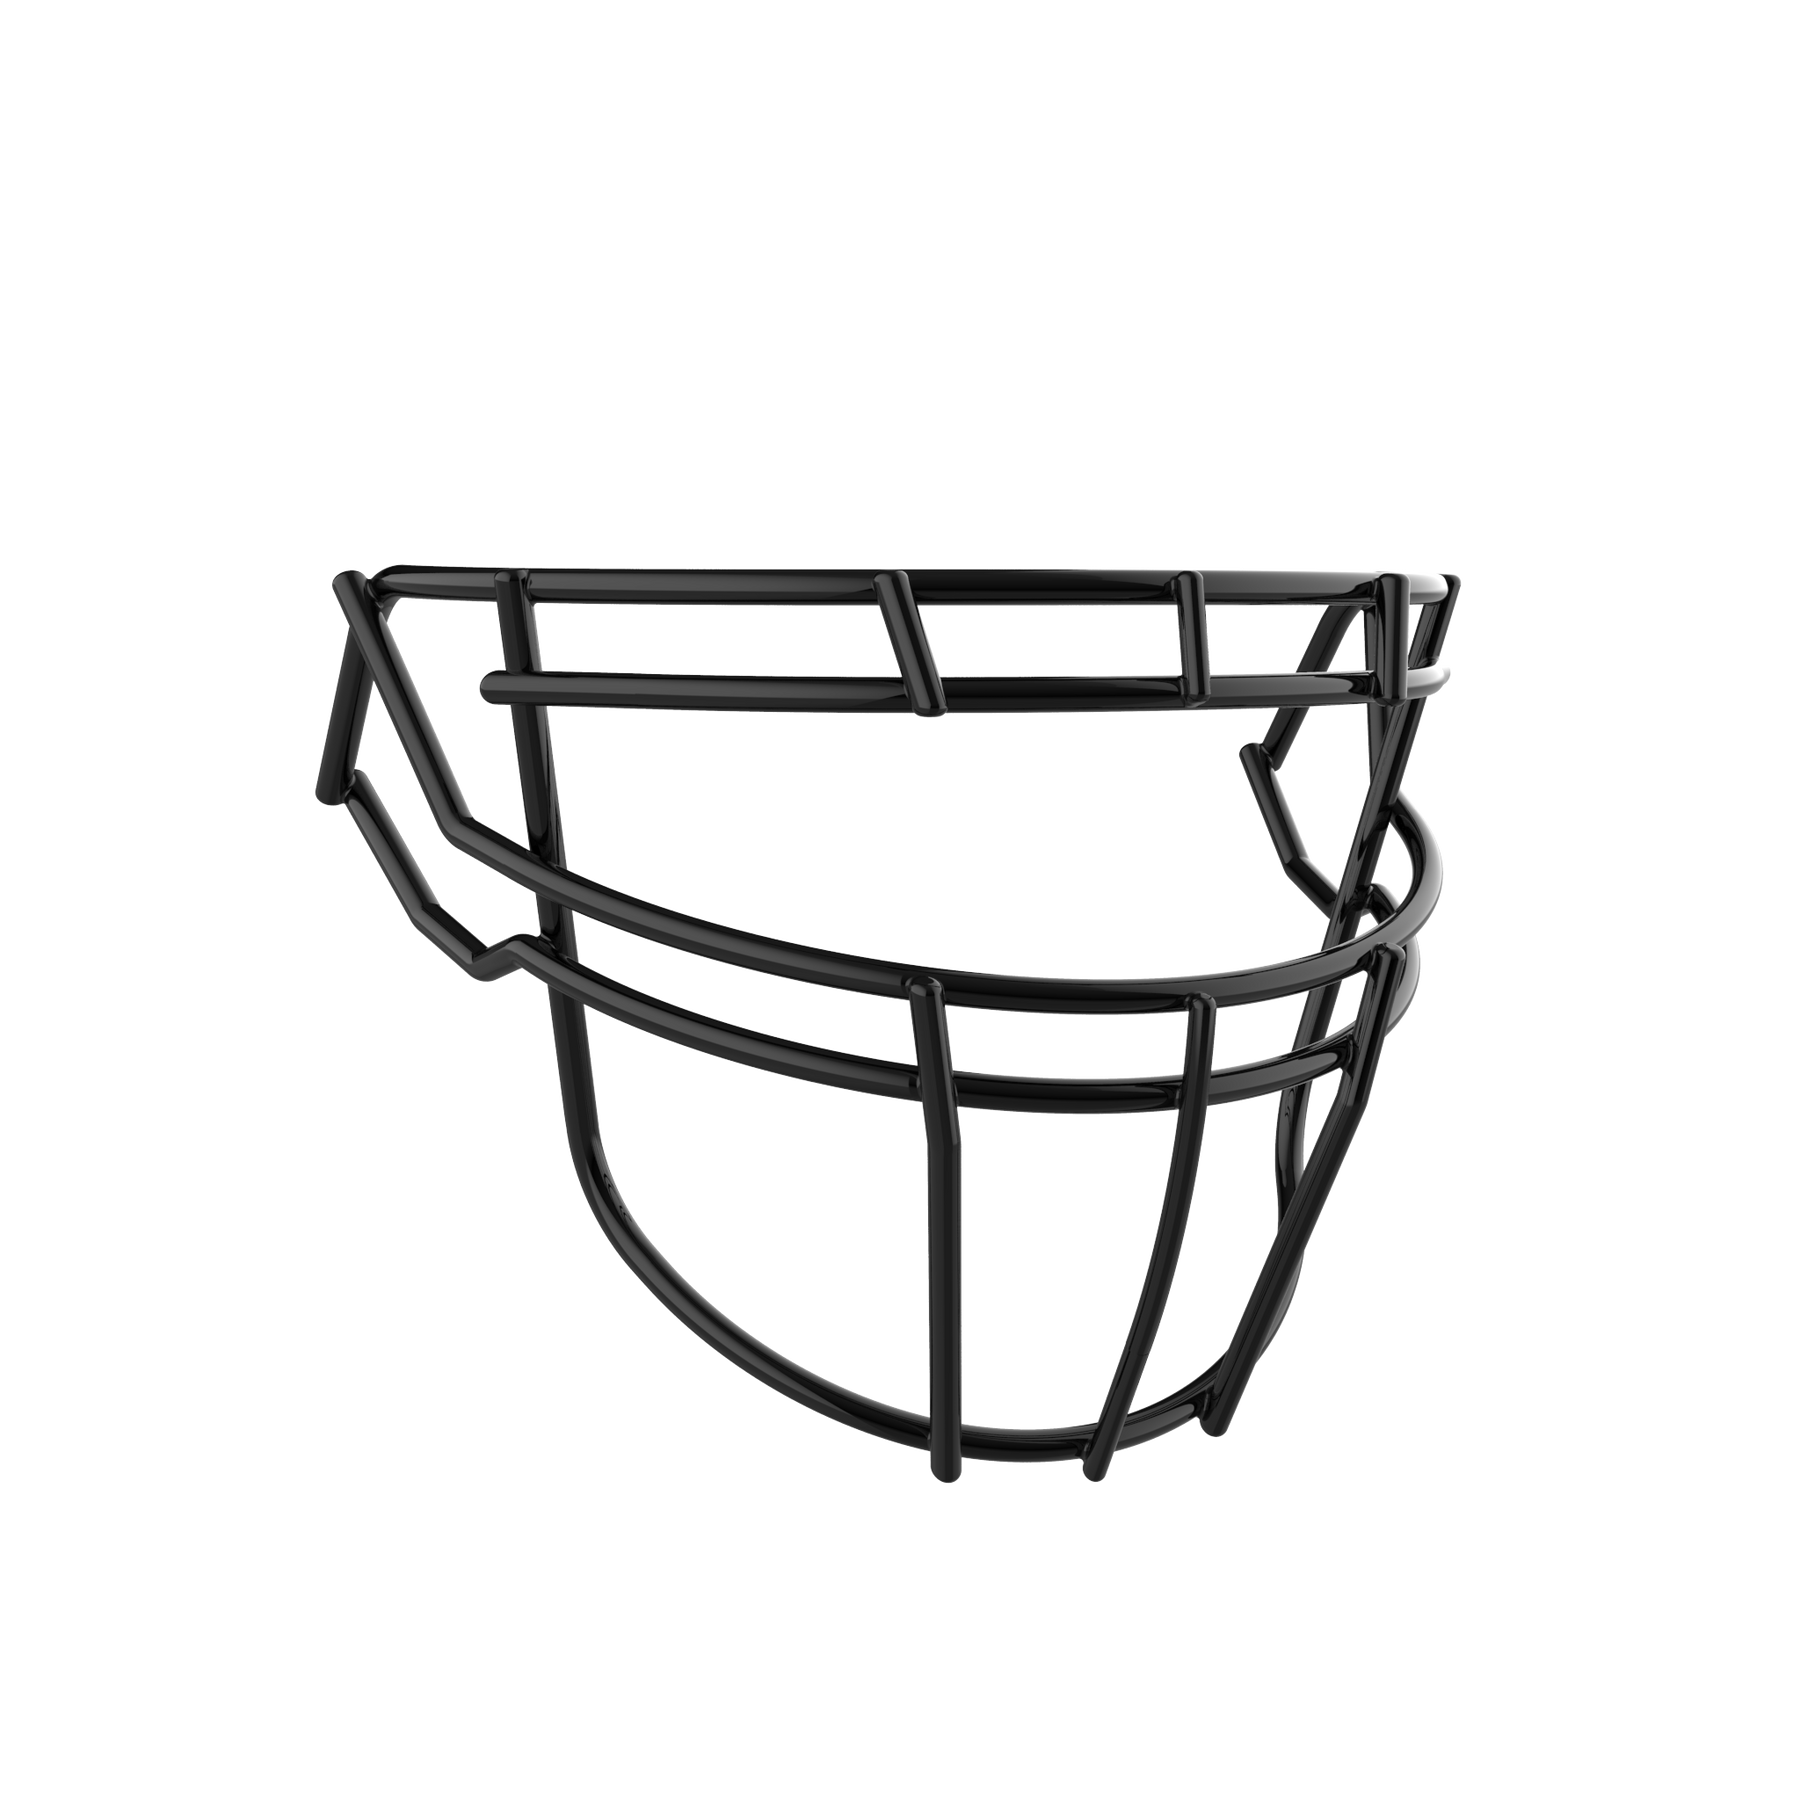 VENGEANCE ROPO-DW-TRAD-NB FACEMASK